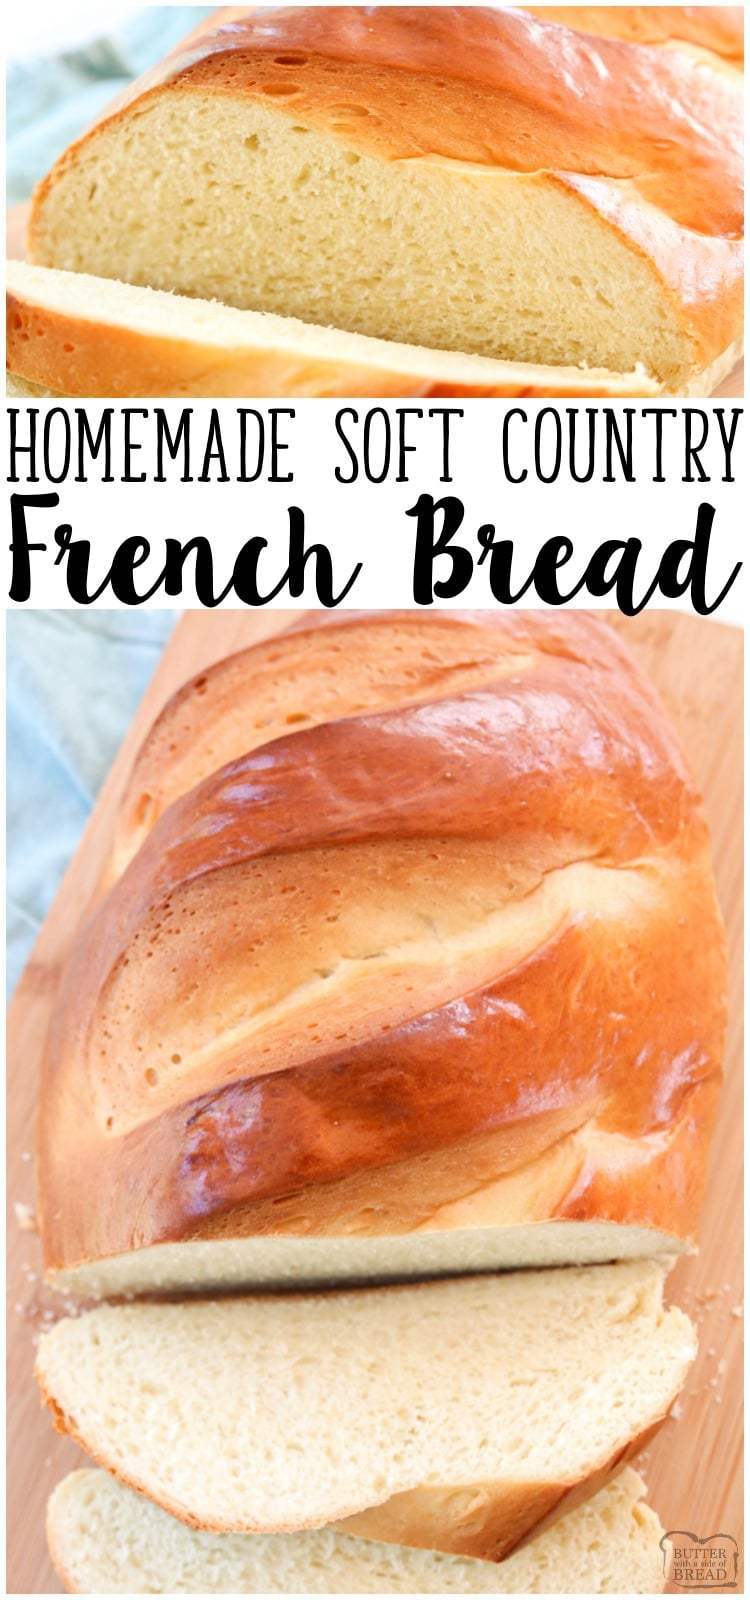 Country French Bread recipe is surprisingly simple instructions showing how to make bread, especially for how gorgeous the bread turns out. Soft, delicious, and done in just over an hour, this homemade bread recipe is a winner. #frenchbread #frenchbreadrecipe #howtomakebread #yeastbread #homemadebread #recipefrom Butter With a Side of Bread